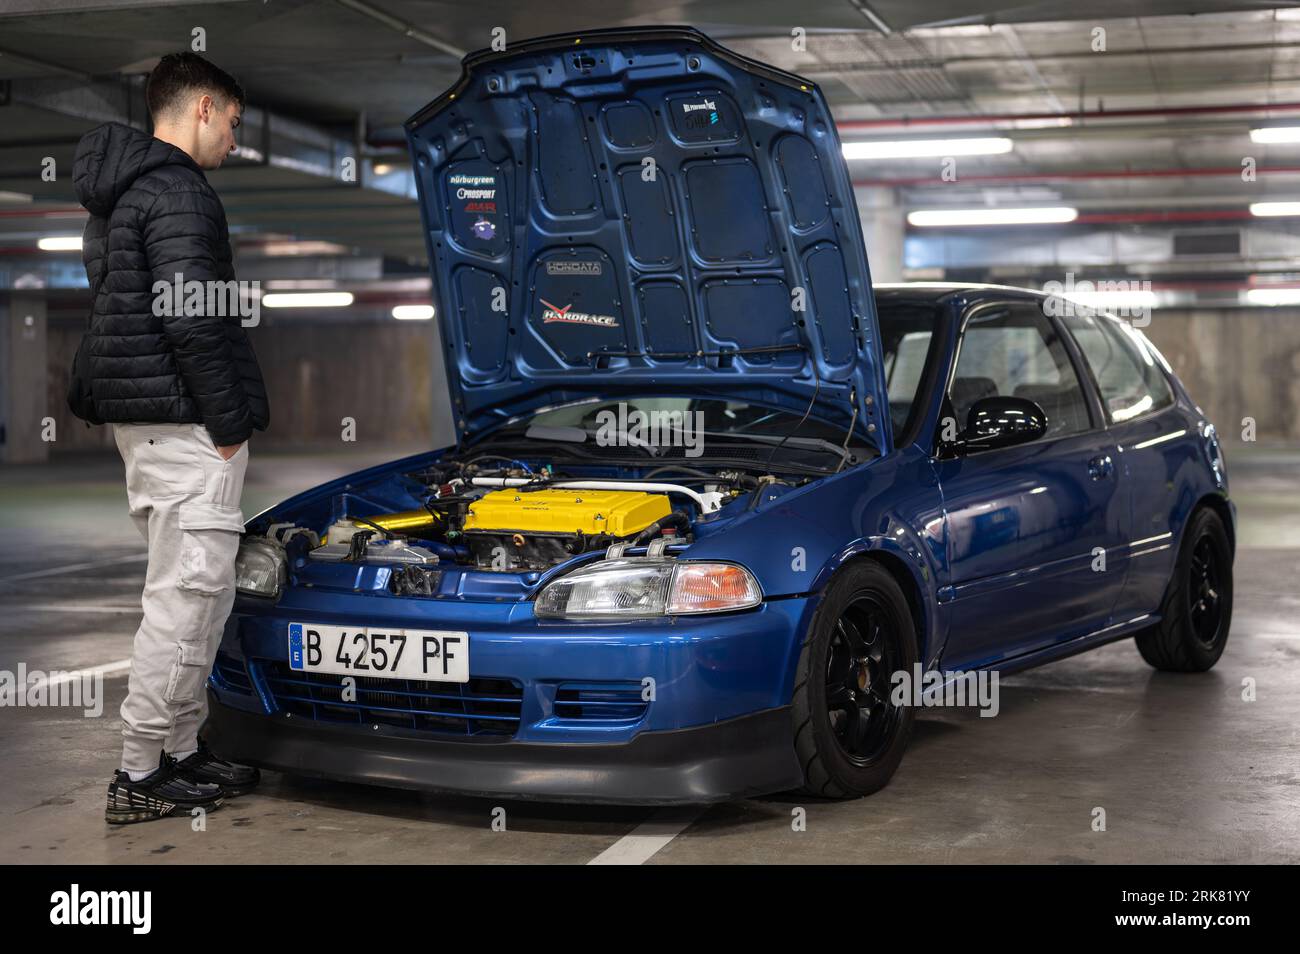 A young man looking at the engine of a Honda Civic EG 1.6 Vtec, the car is blue in color and the hood is open Stock Photo